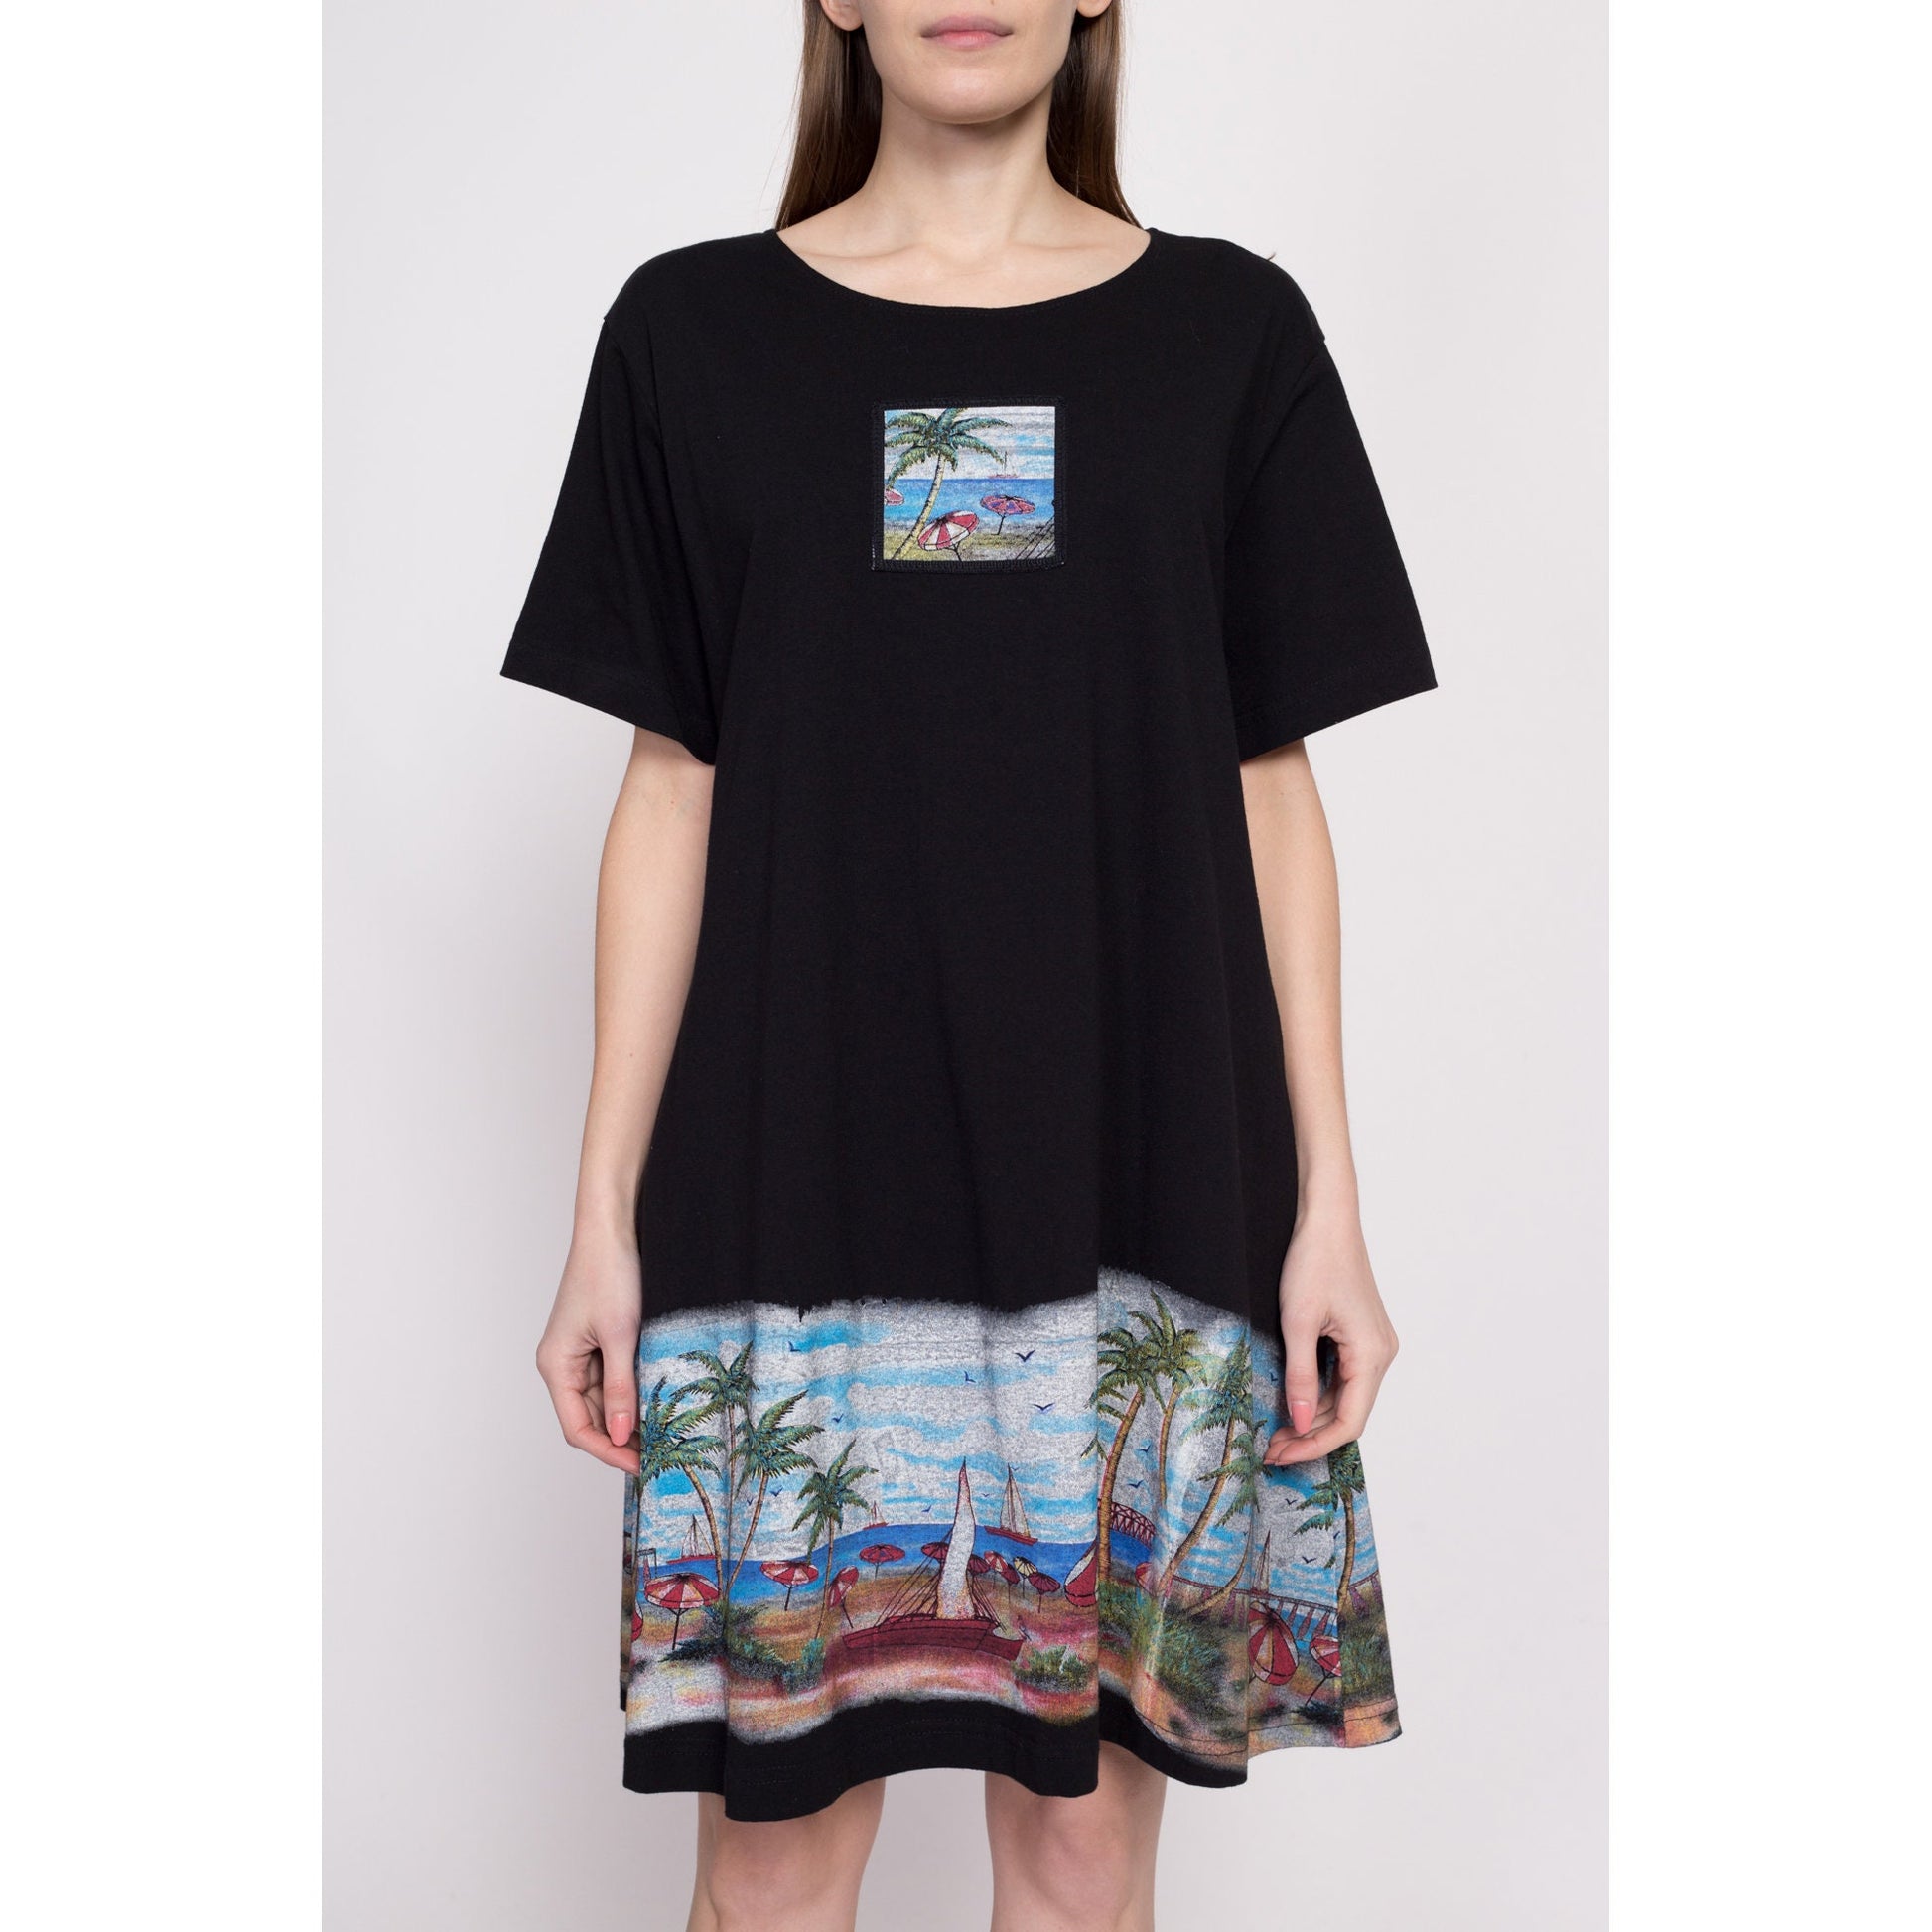 90s Painted Beach Scene Graphic T Shirt Dress - Large – Flying